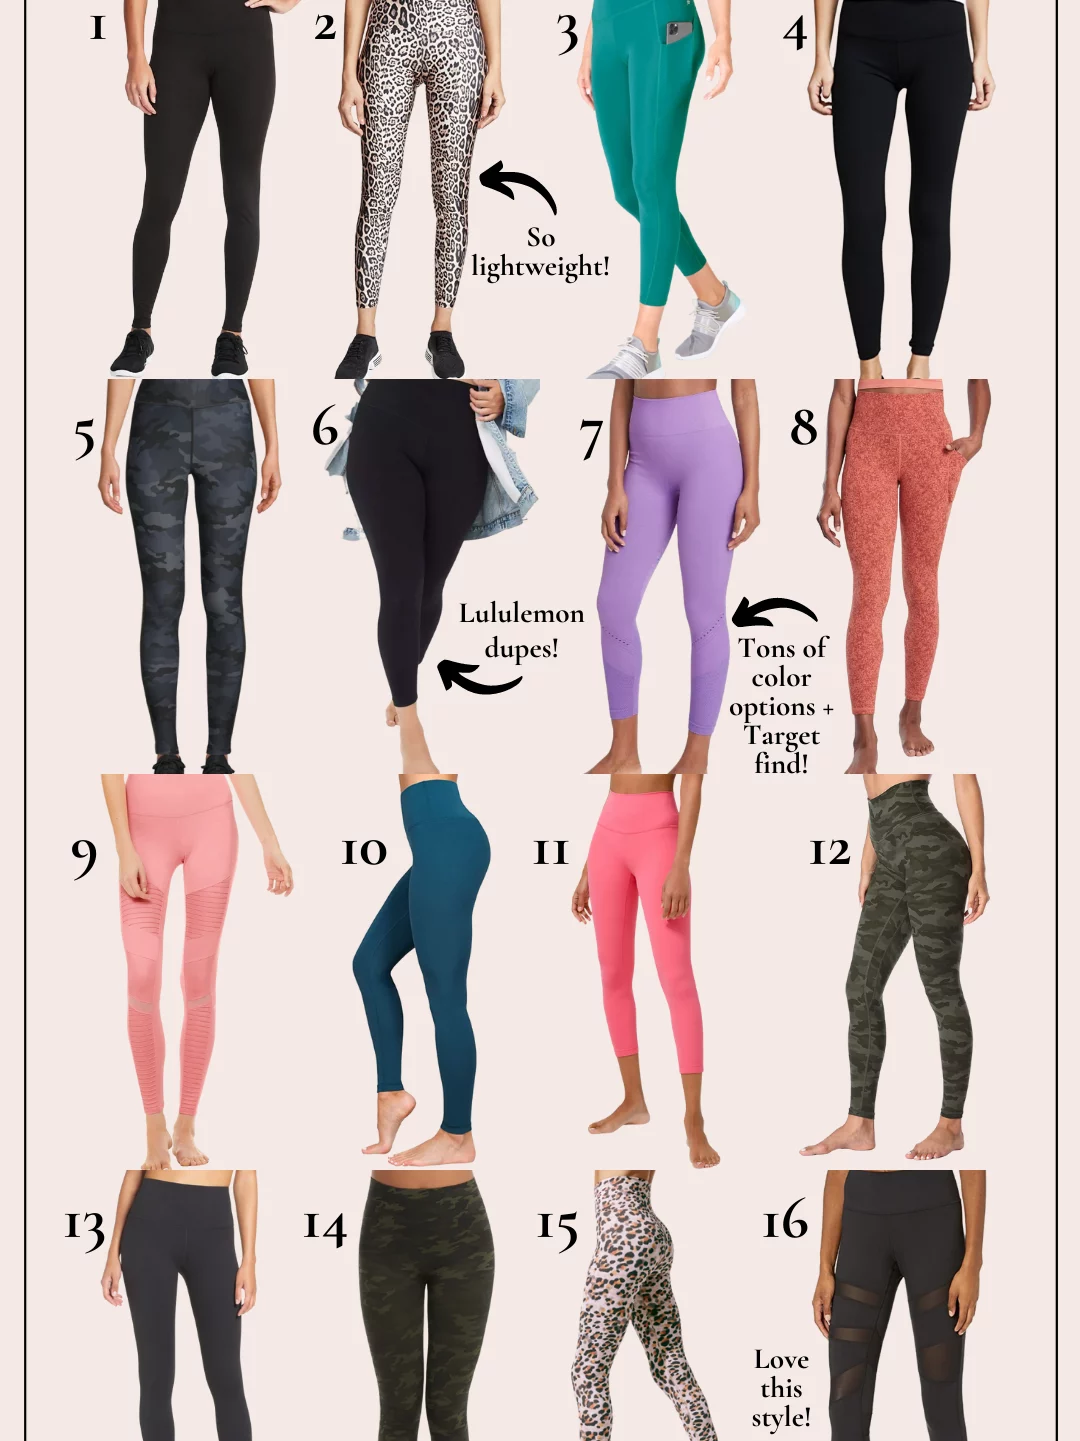 Fashion + Lifestyle blogger, My Life Well Loved, shares her favorite Spanx faux leather leggings dupes! Check it out here!